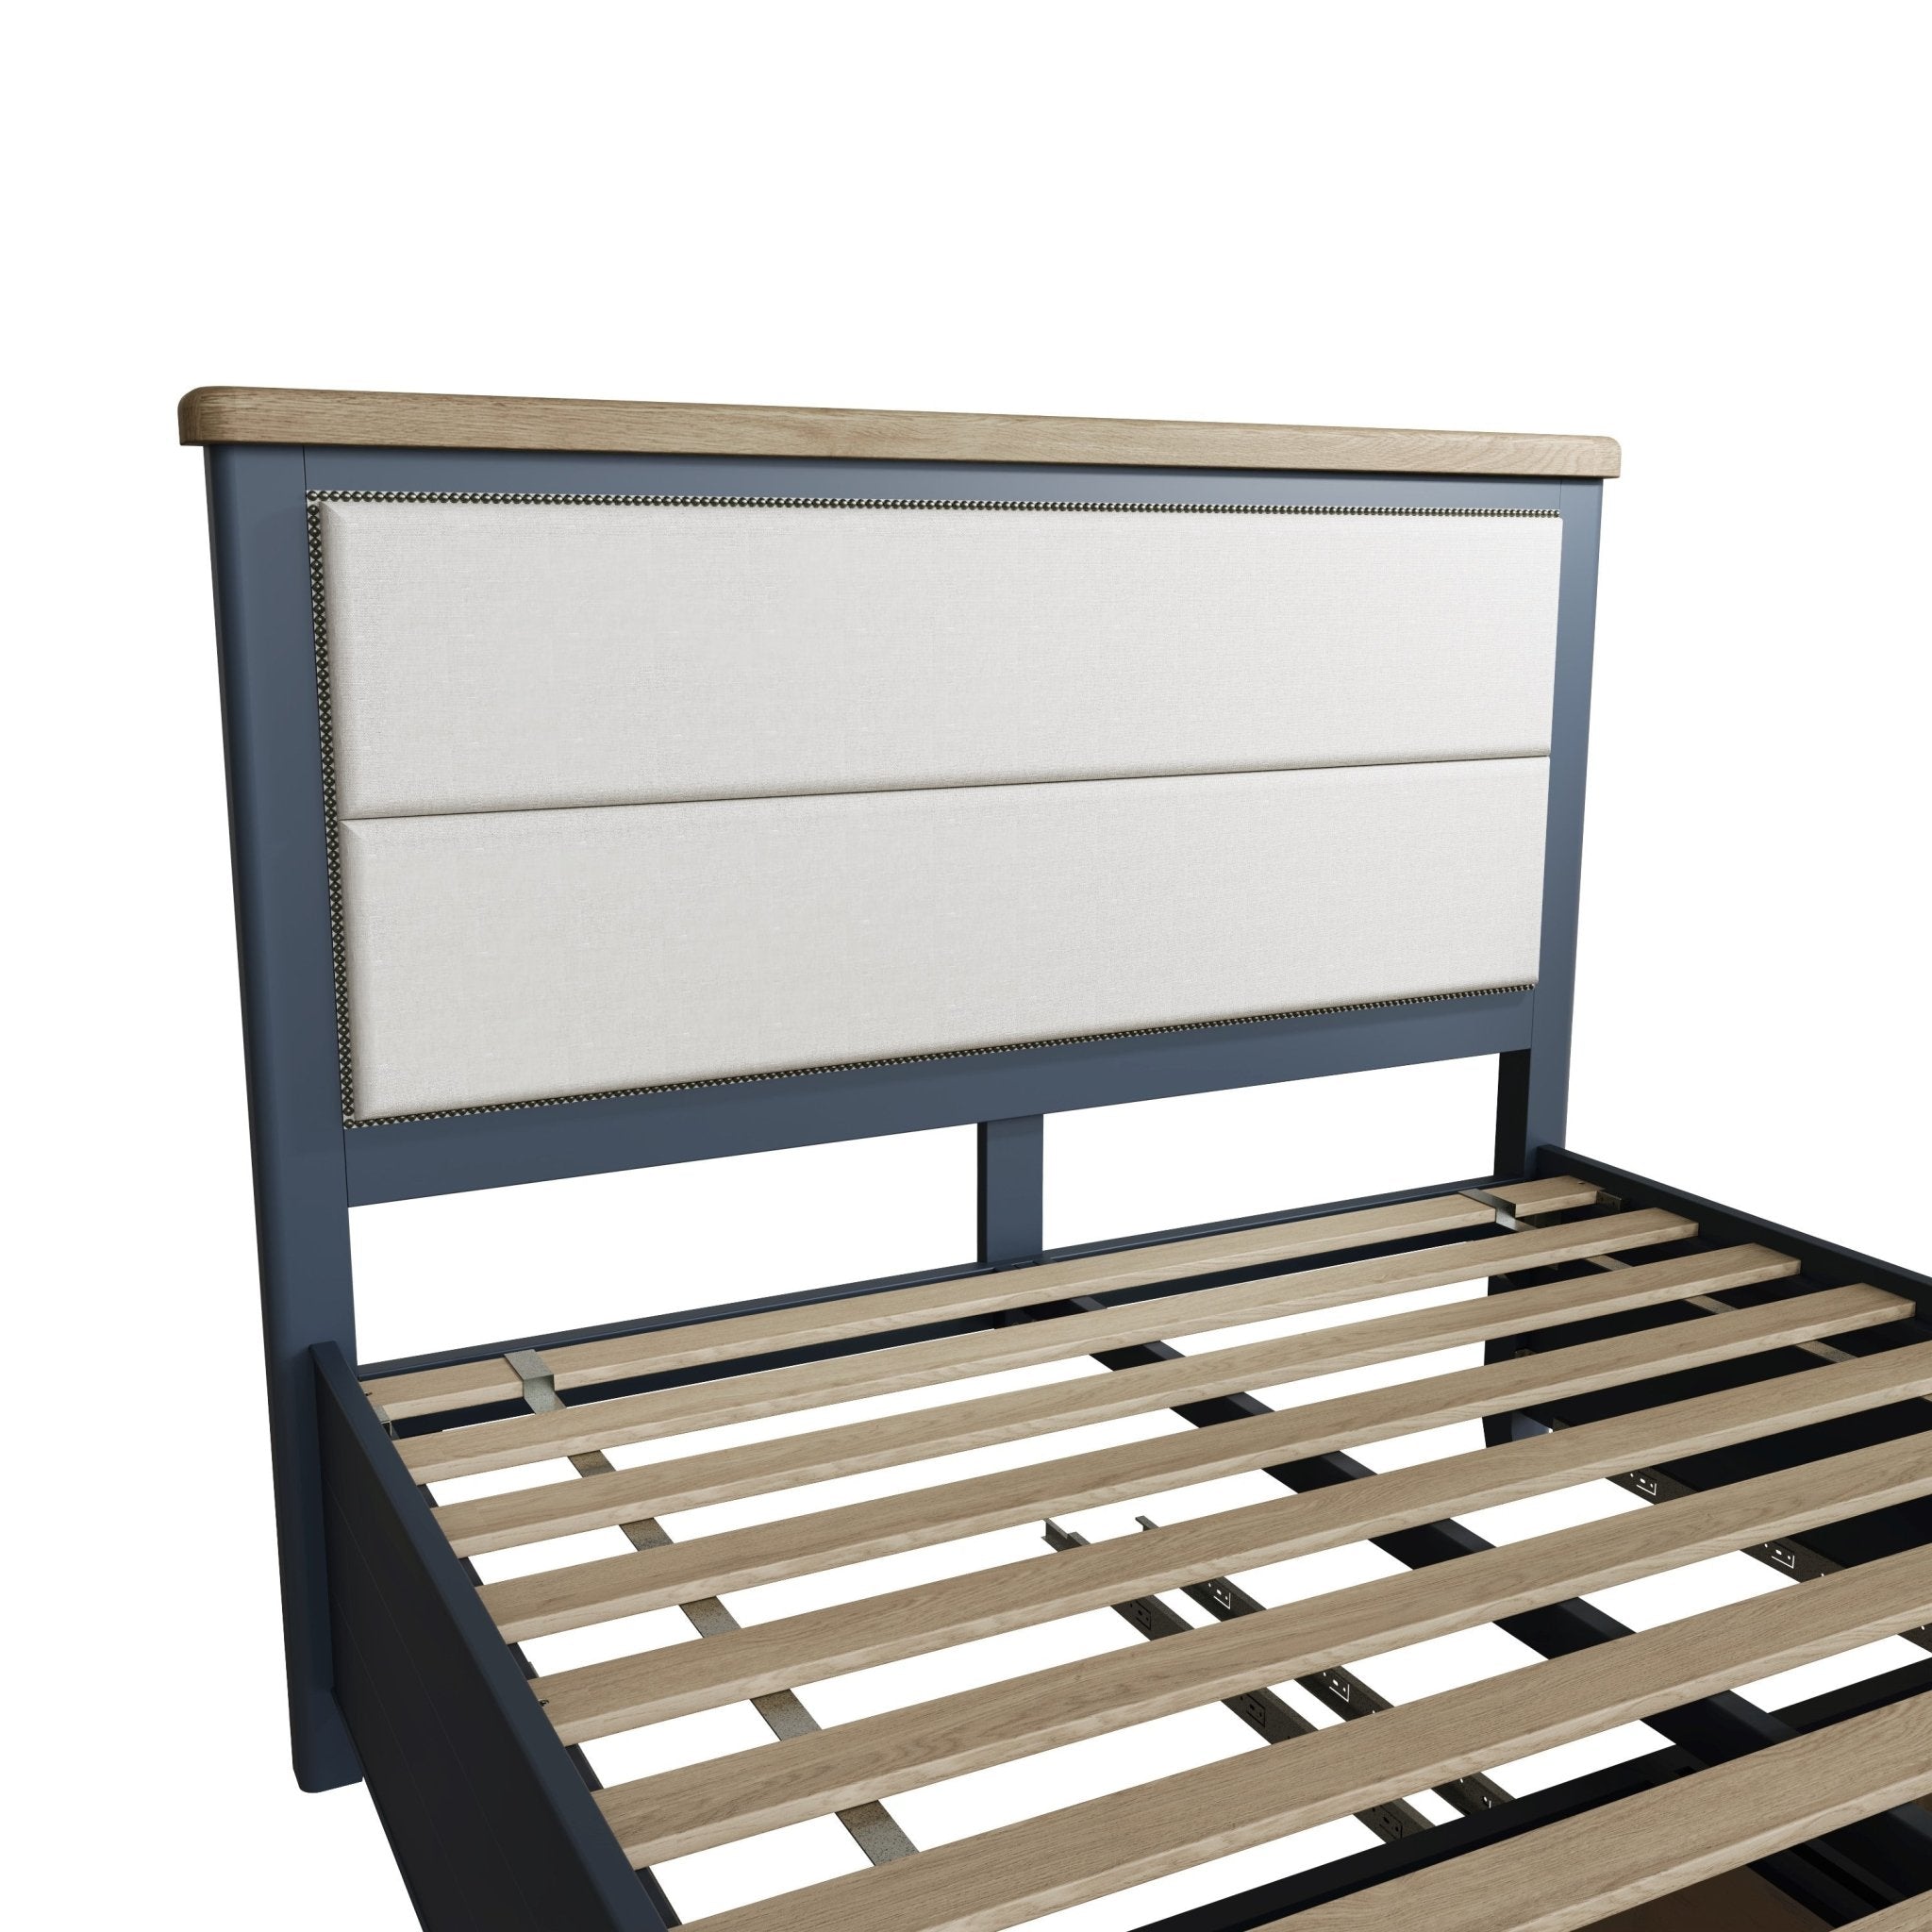 Rogate Blue 6'0 Super King Size Bed Frame - Fabric Headboard & Drawers - Duck Barn Interiors